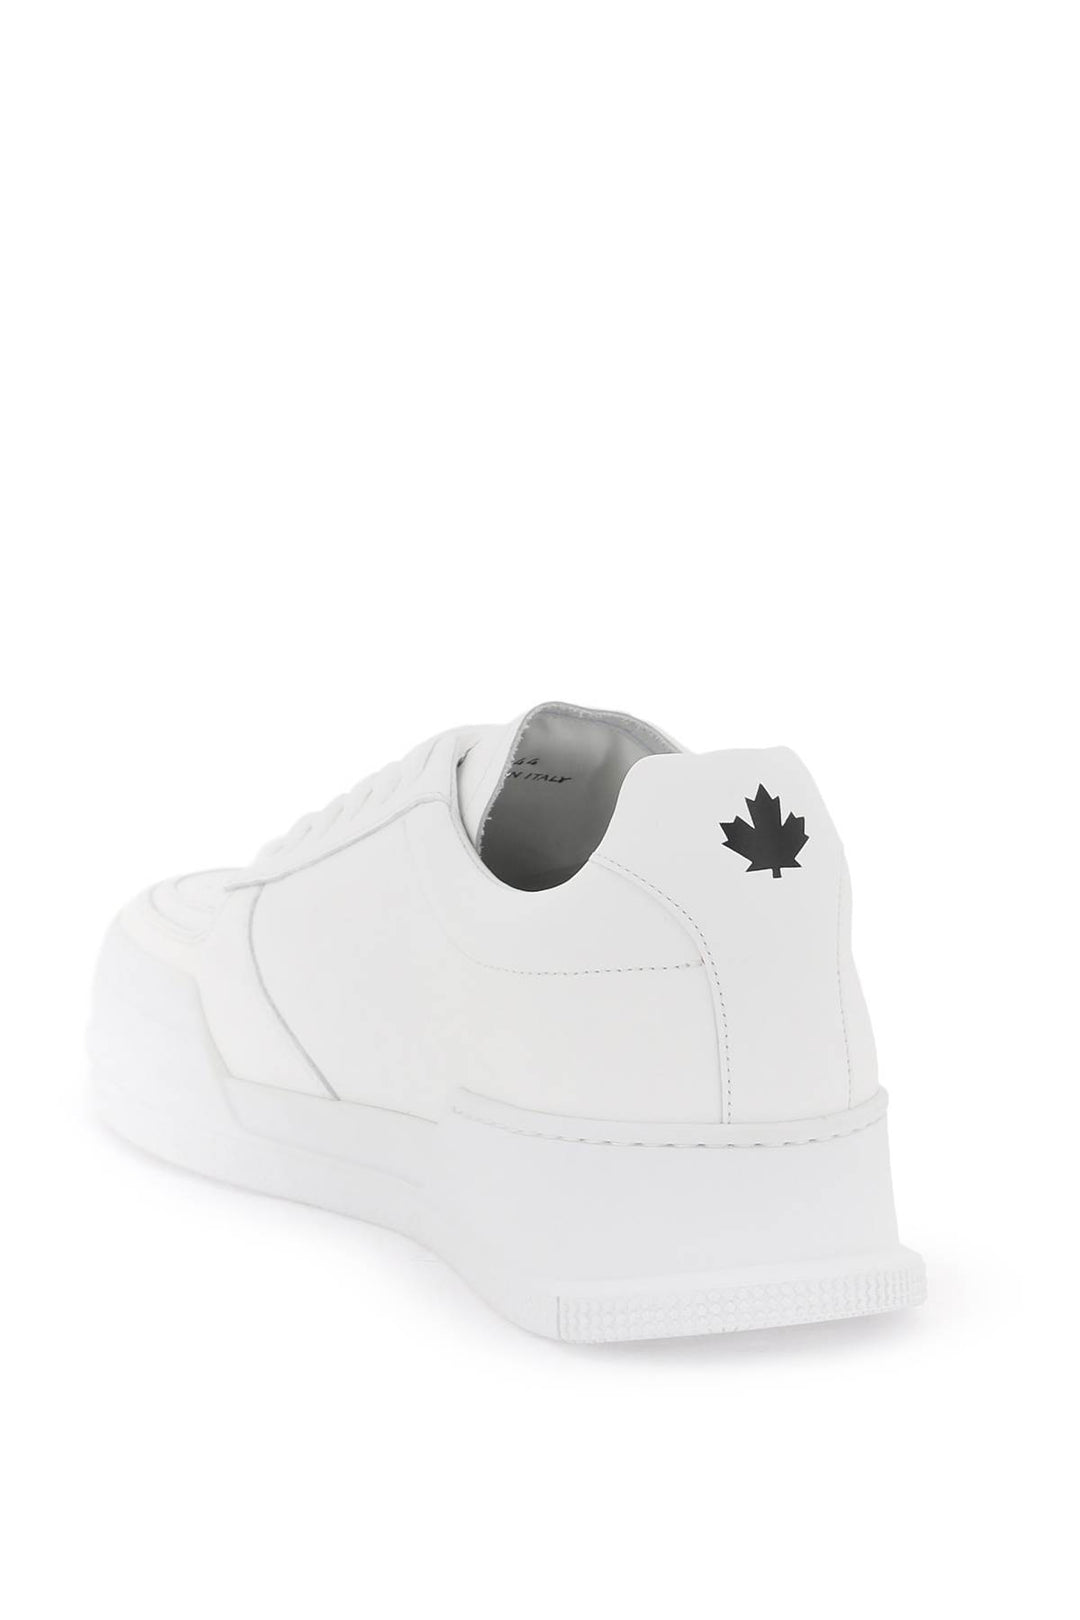 Sneakers Canadian - Dsquared2 - Uomo